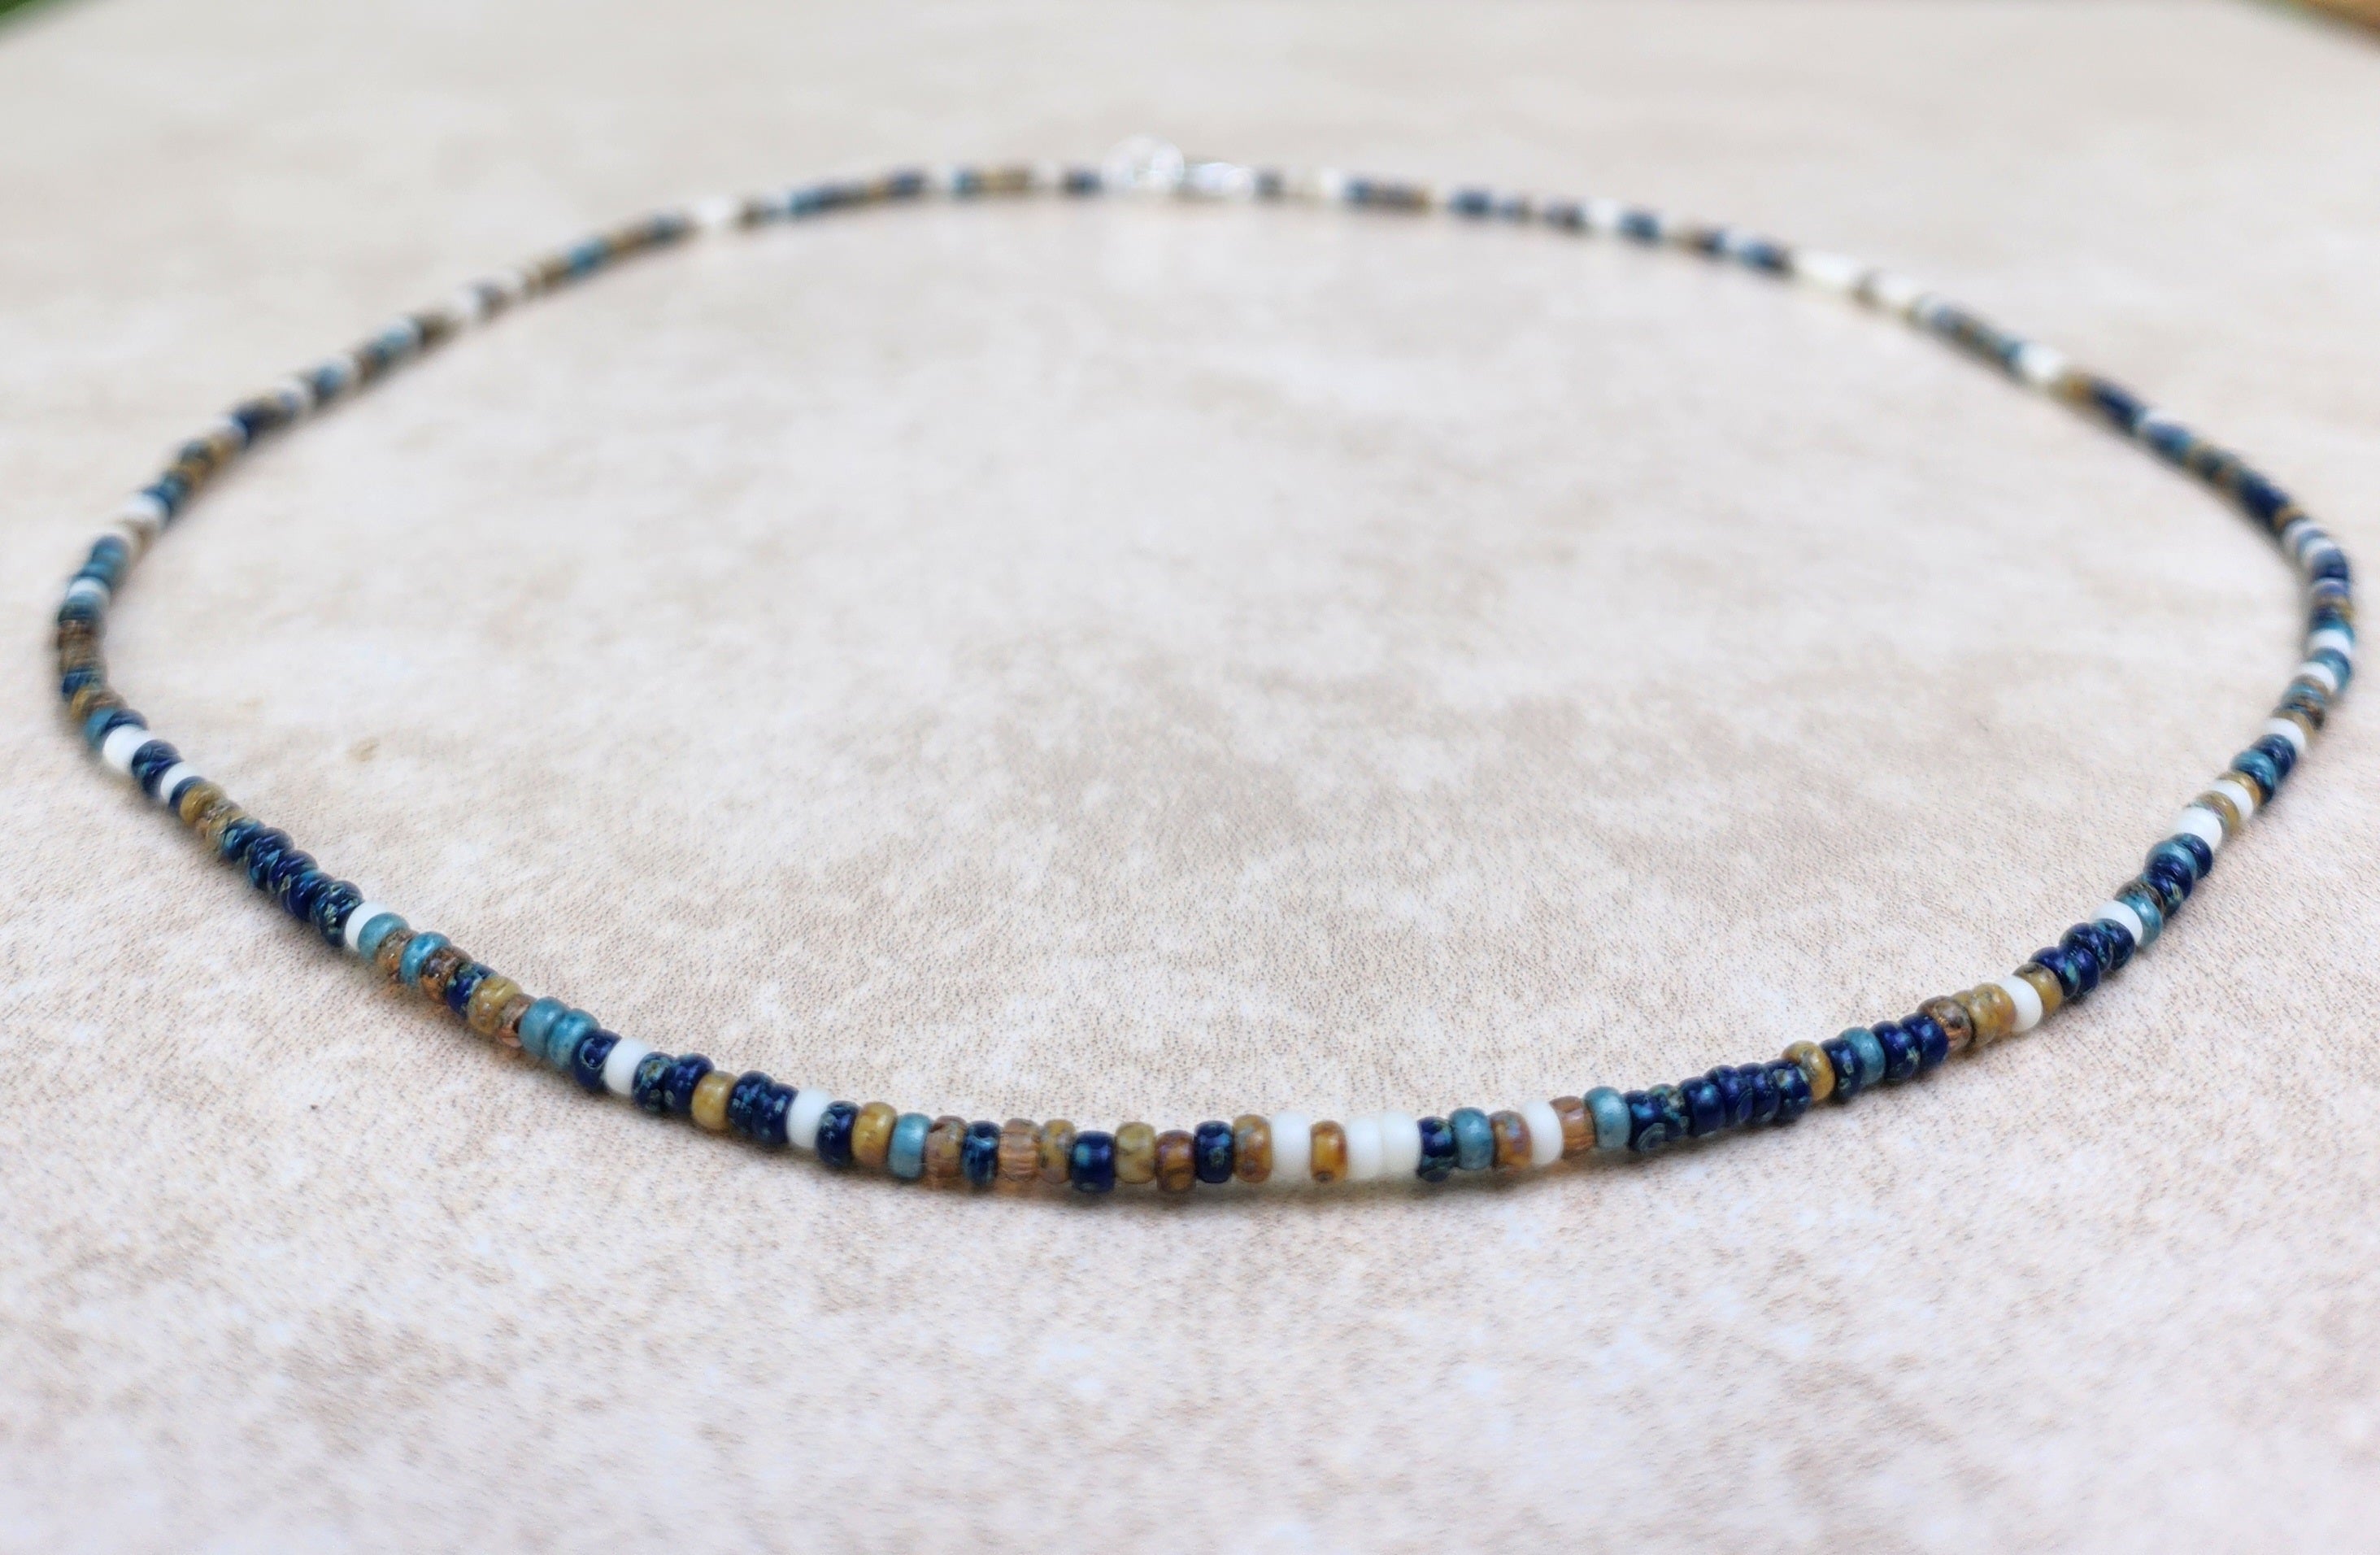 Black, Brown and White Bead Necklace